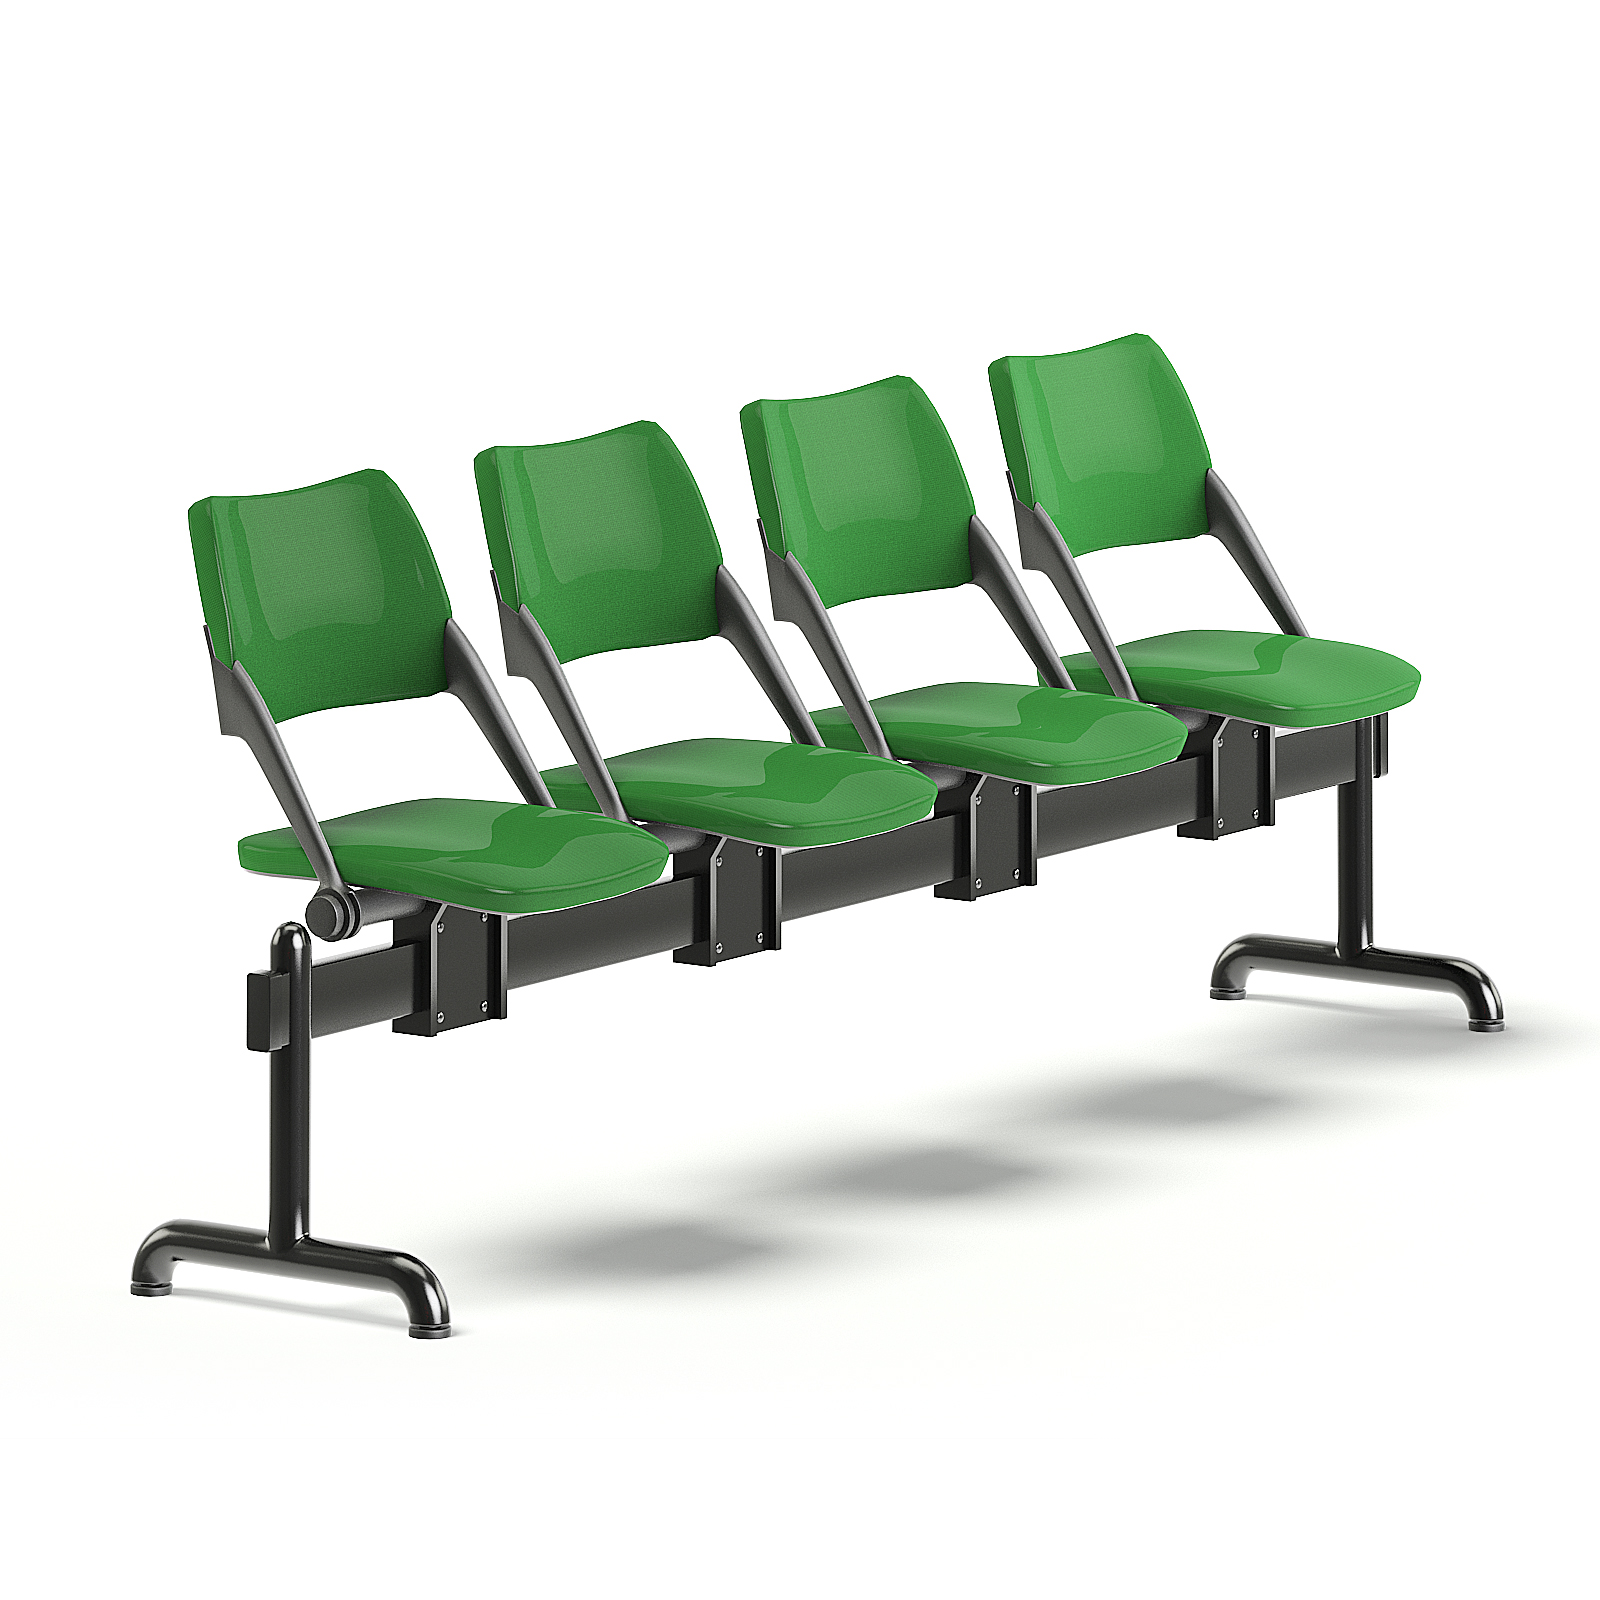 Green Waiting Chairs 3d Model By Cgaxis 3docean